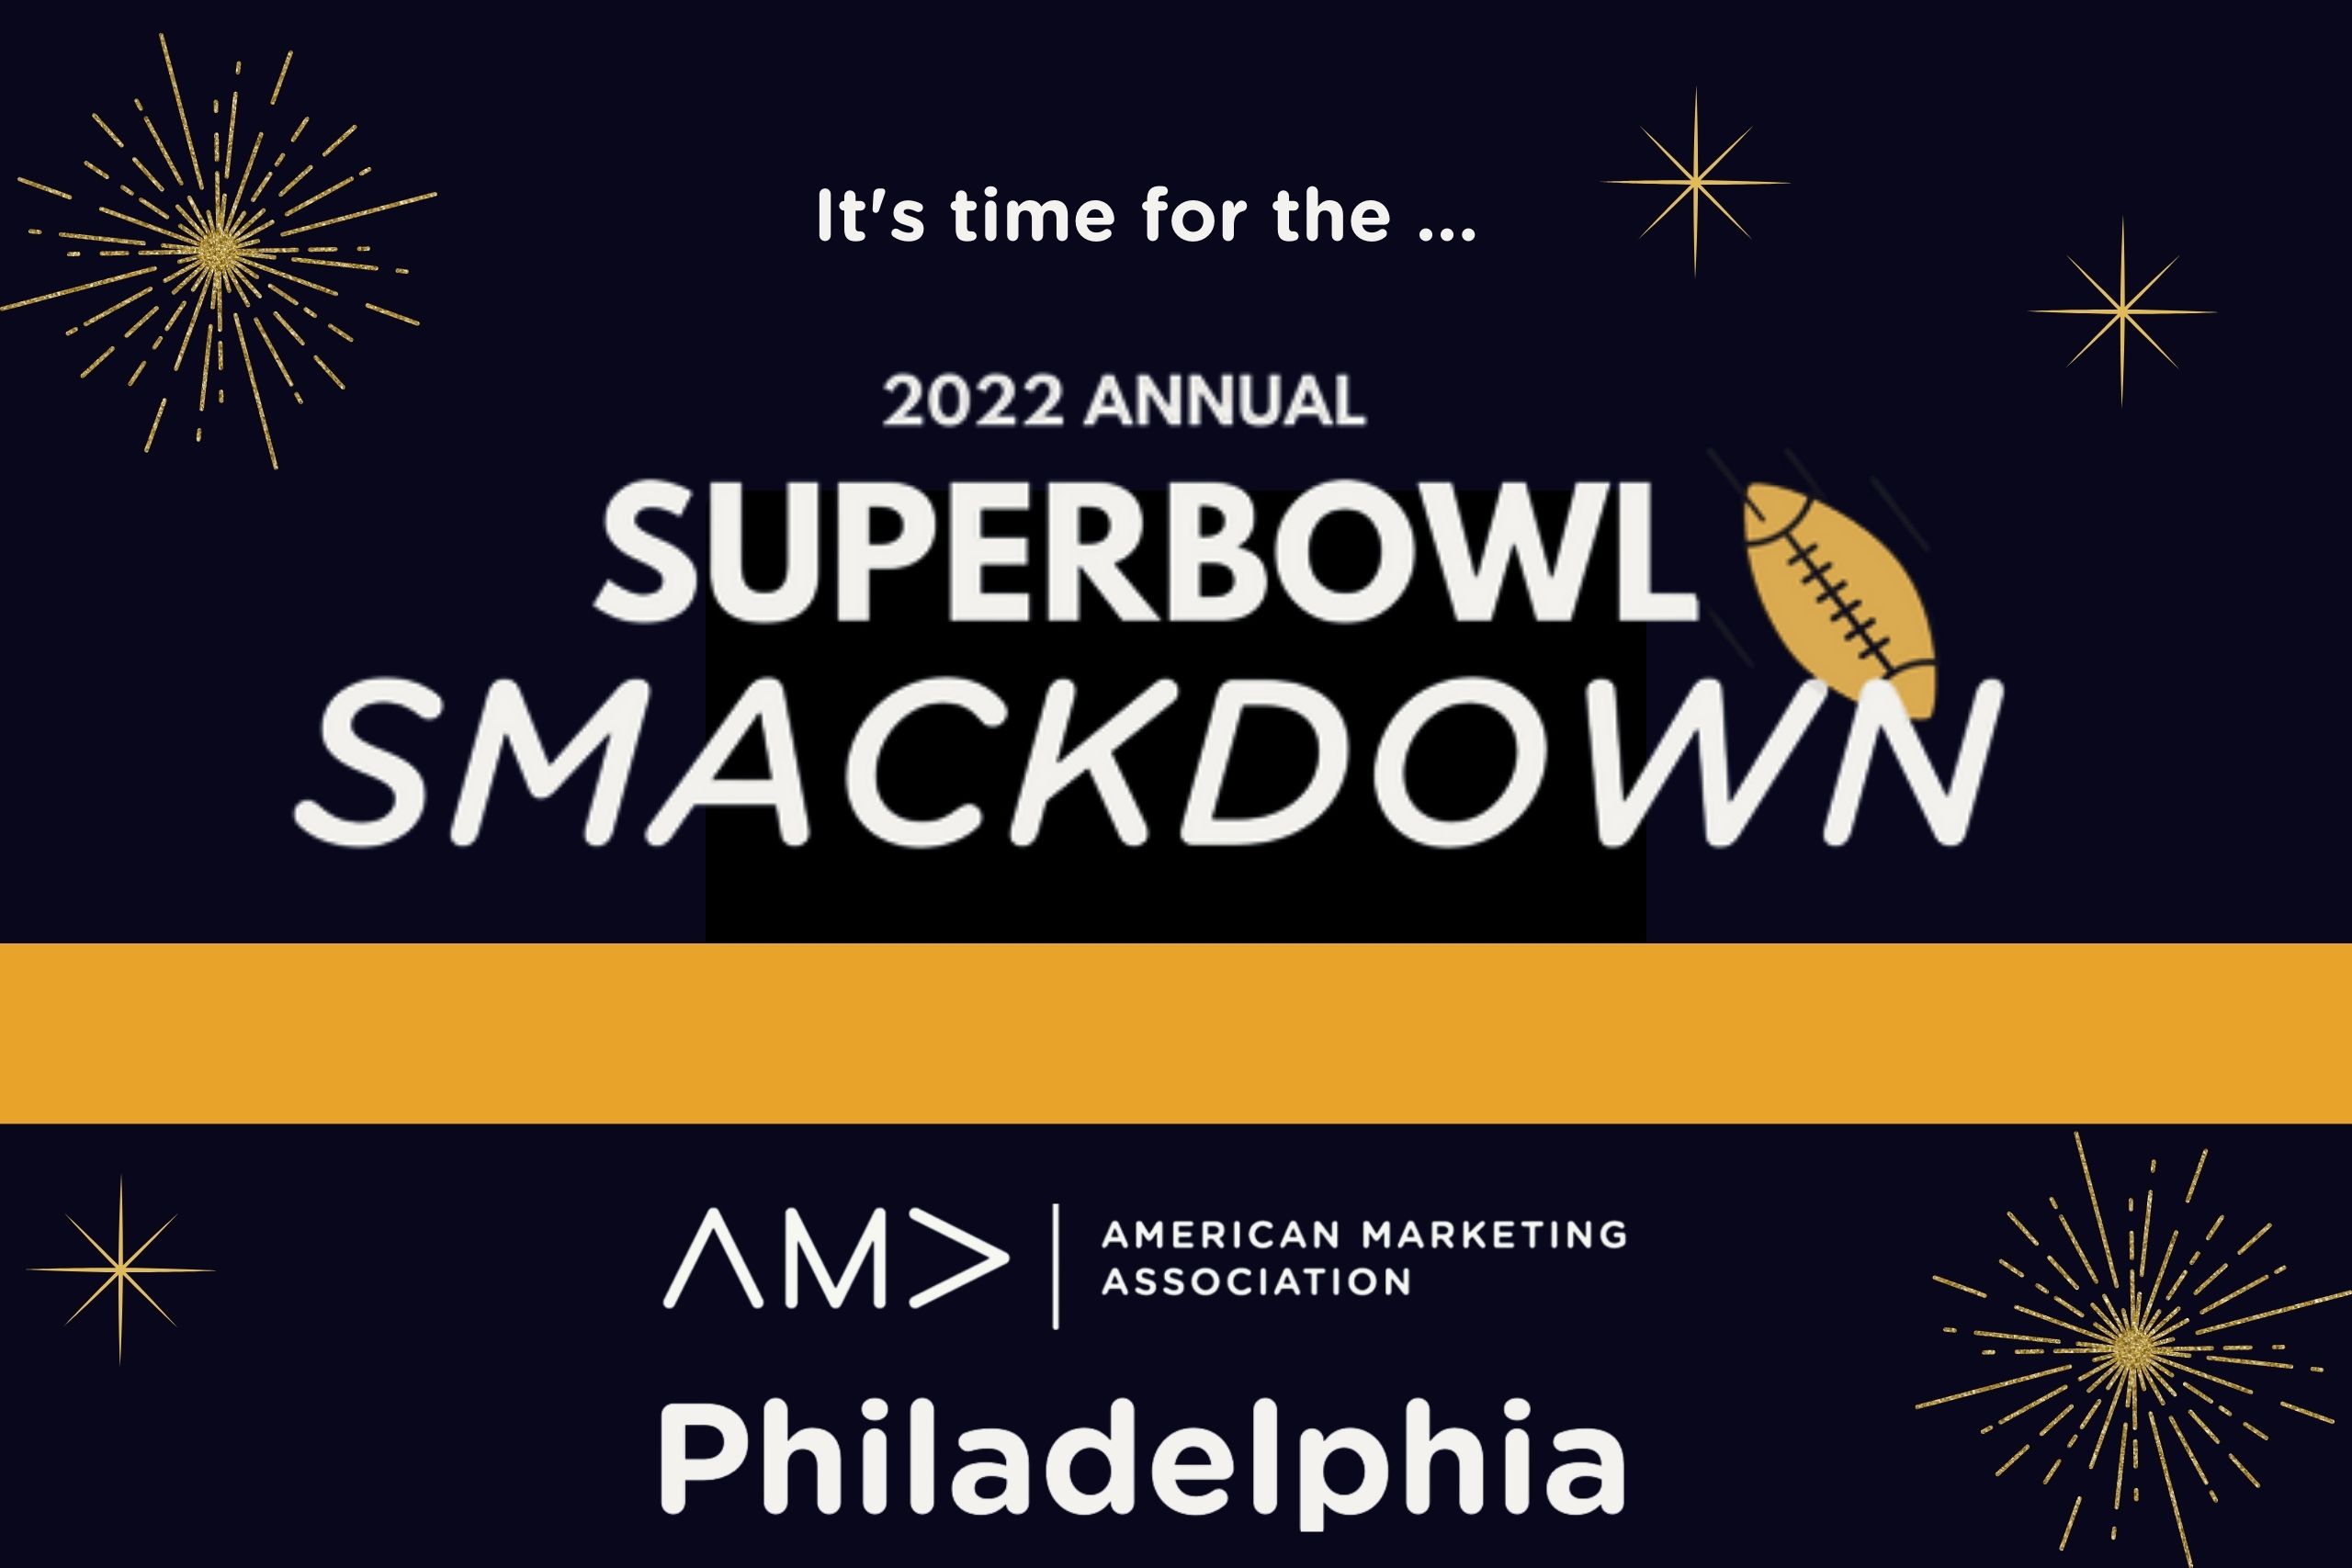 Super Bowl Ads: It’s Time For The 2022 Smackdown!